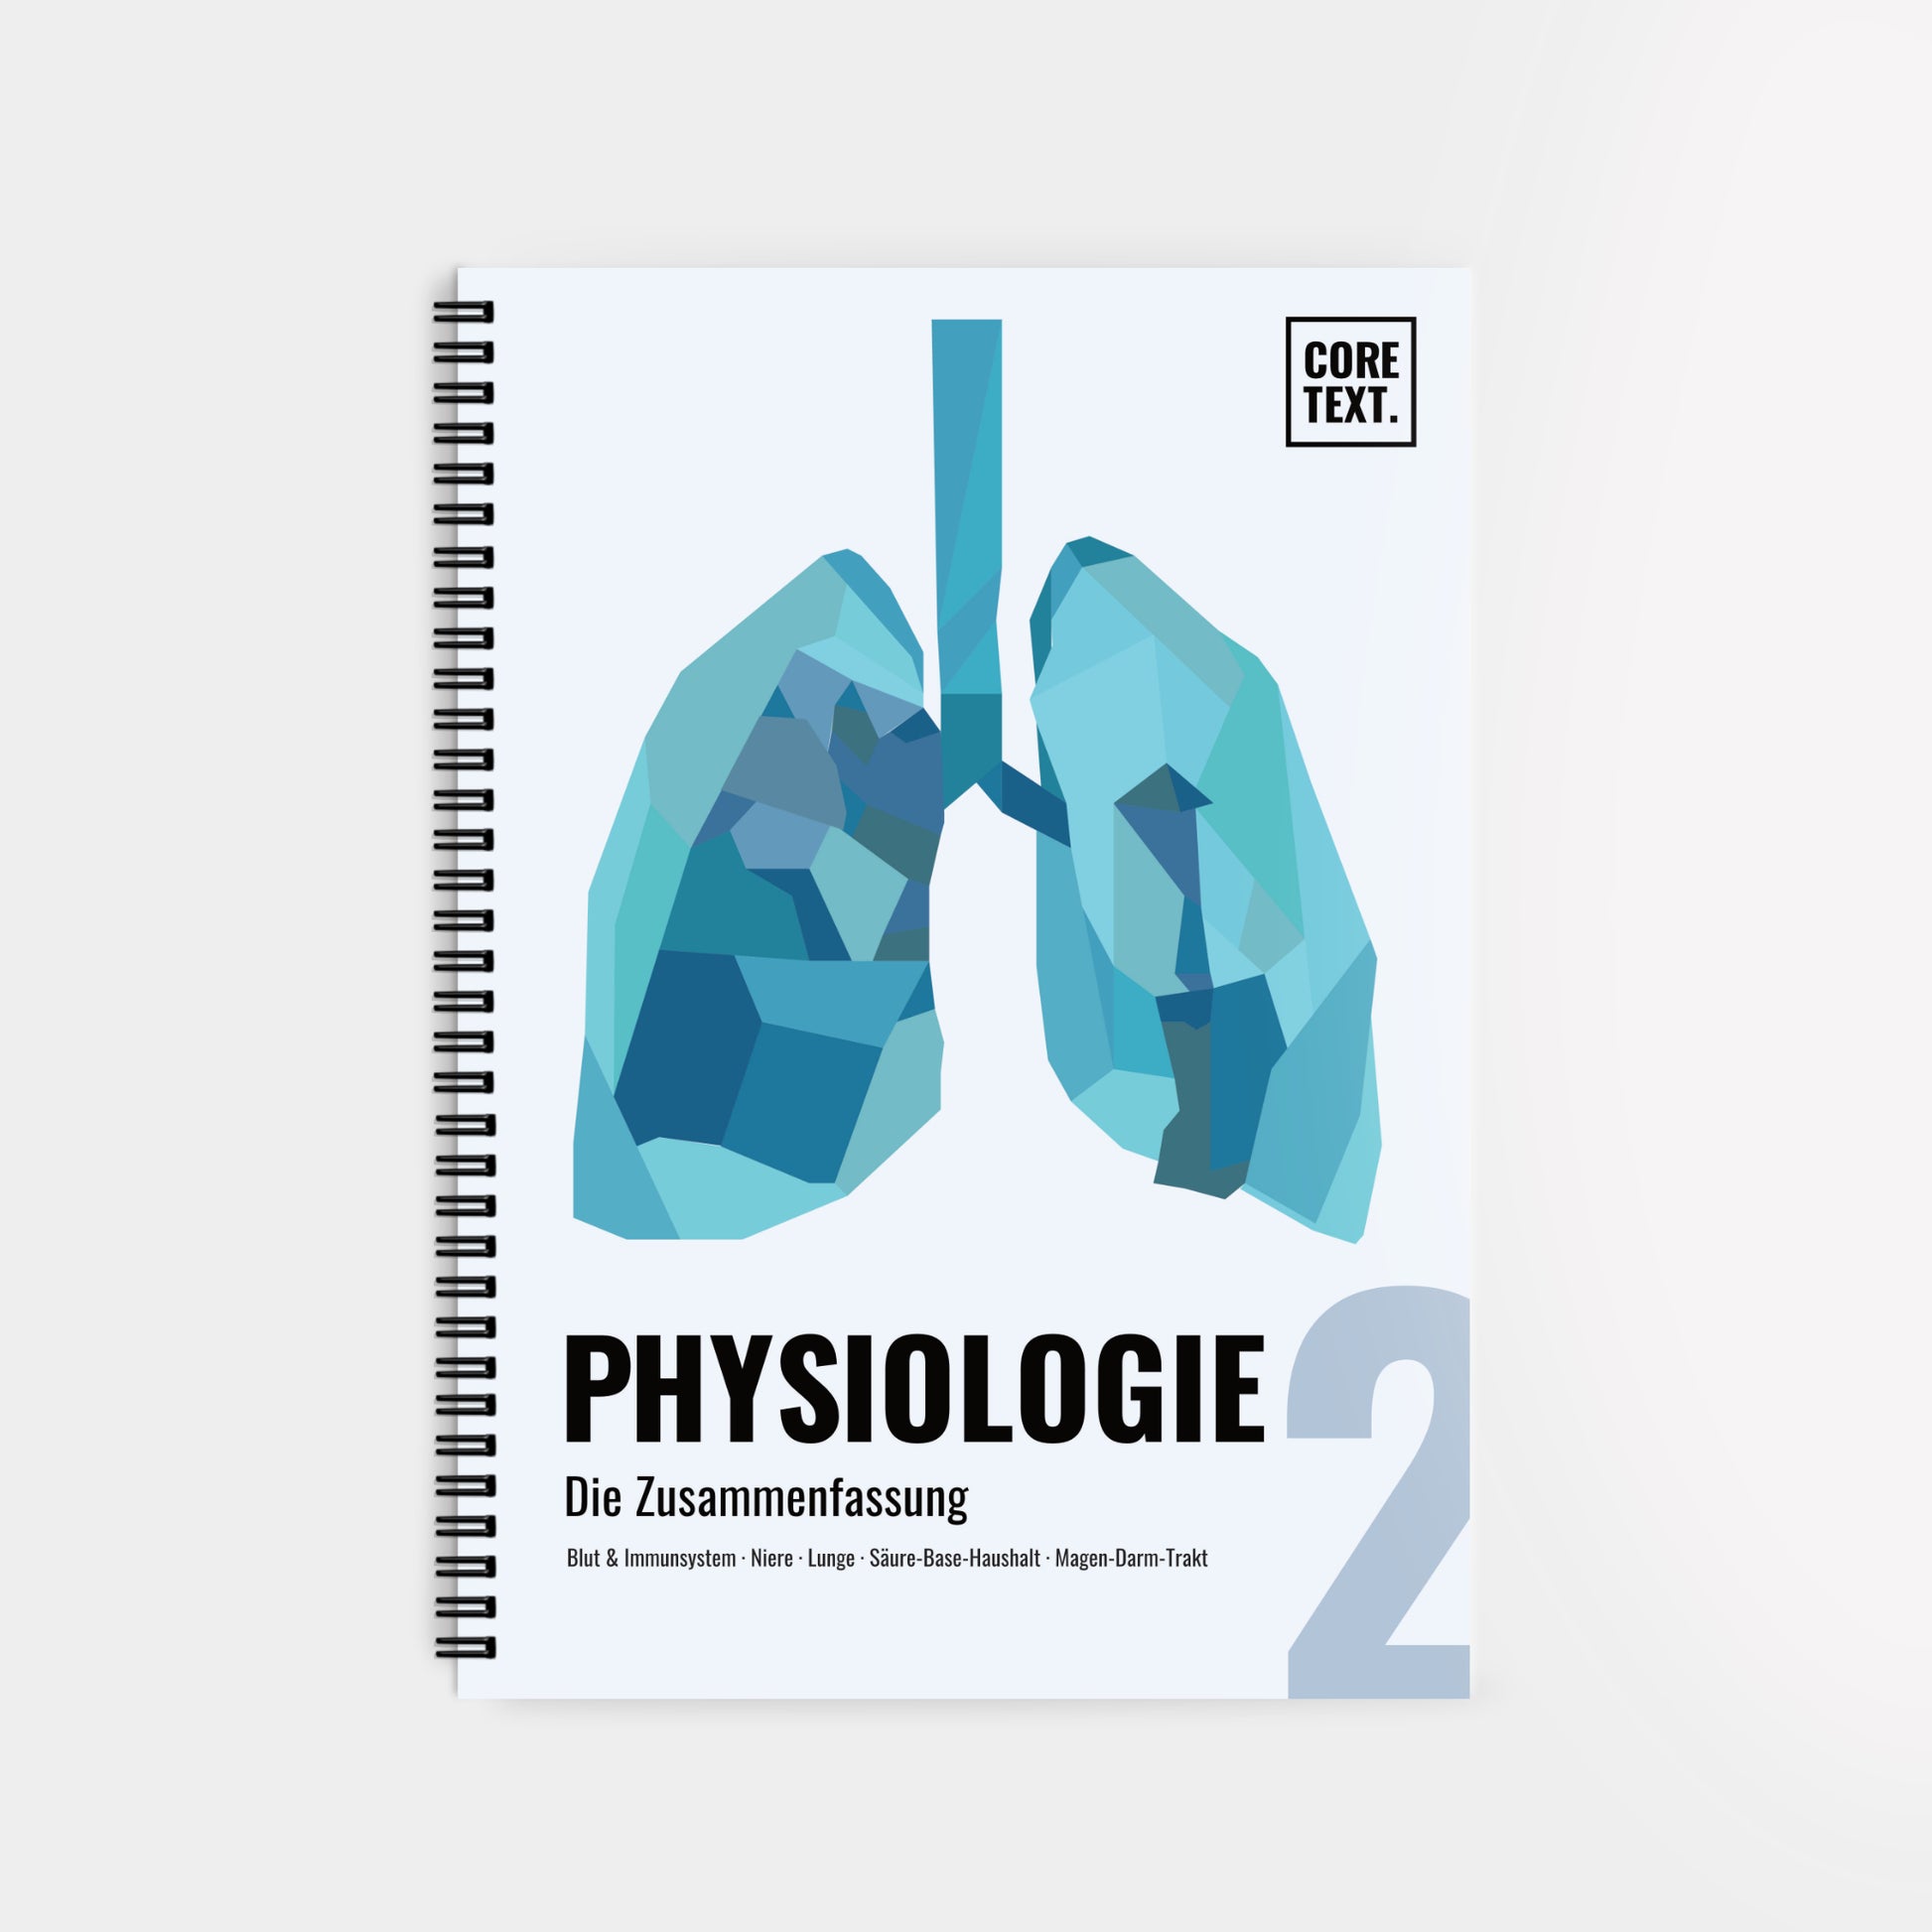 Physiologie 2 - CORETEXT